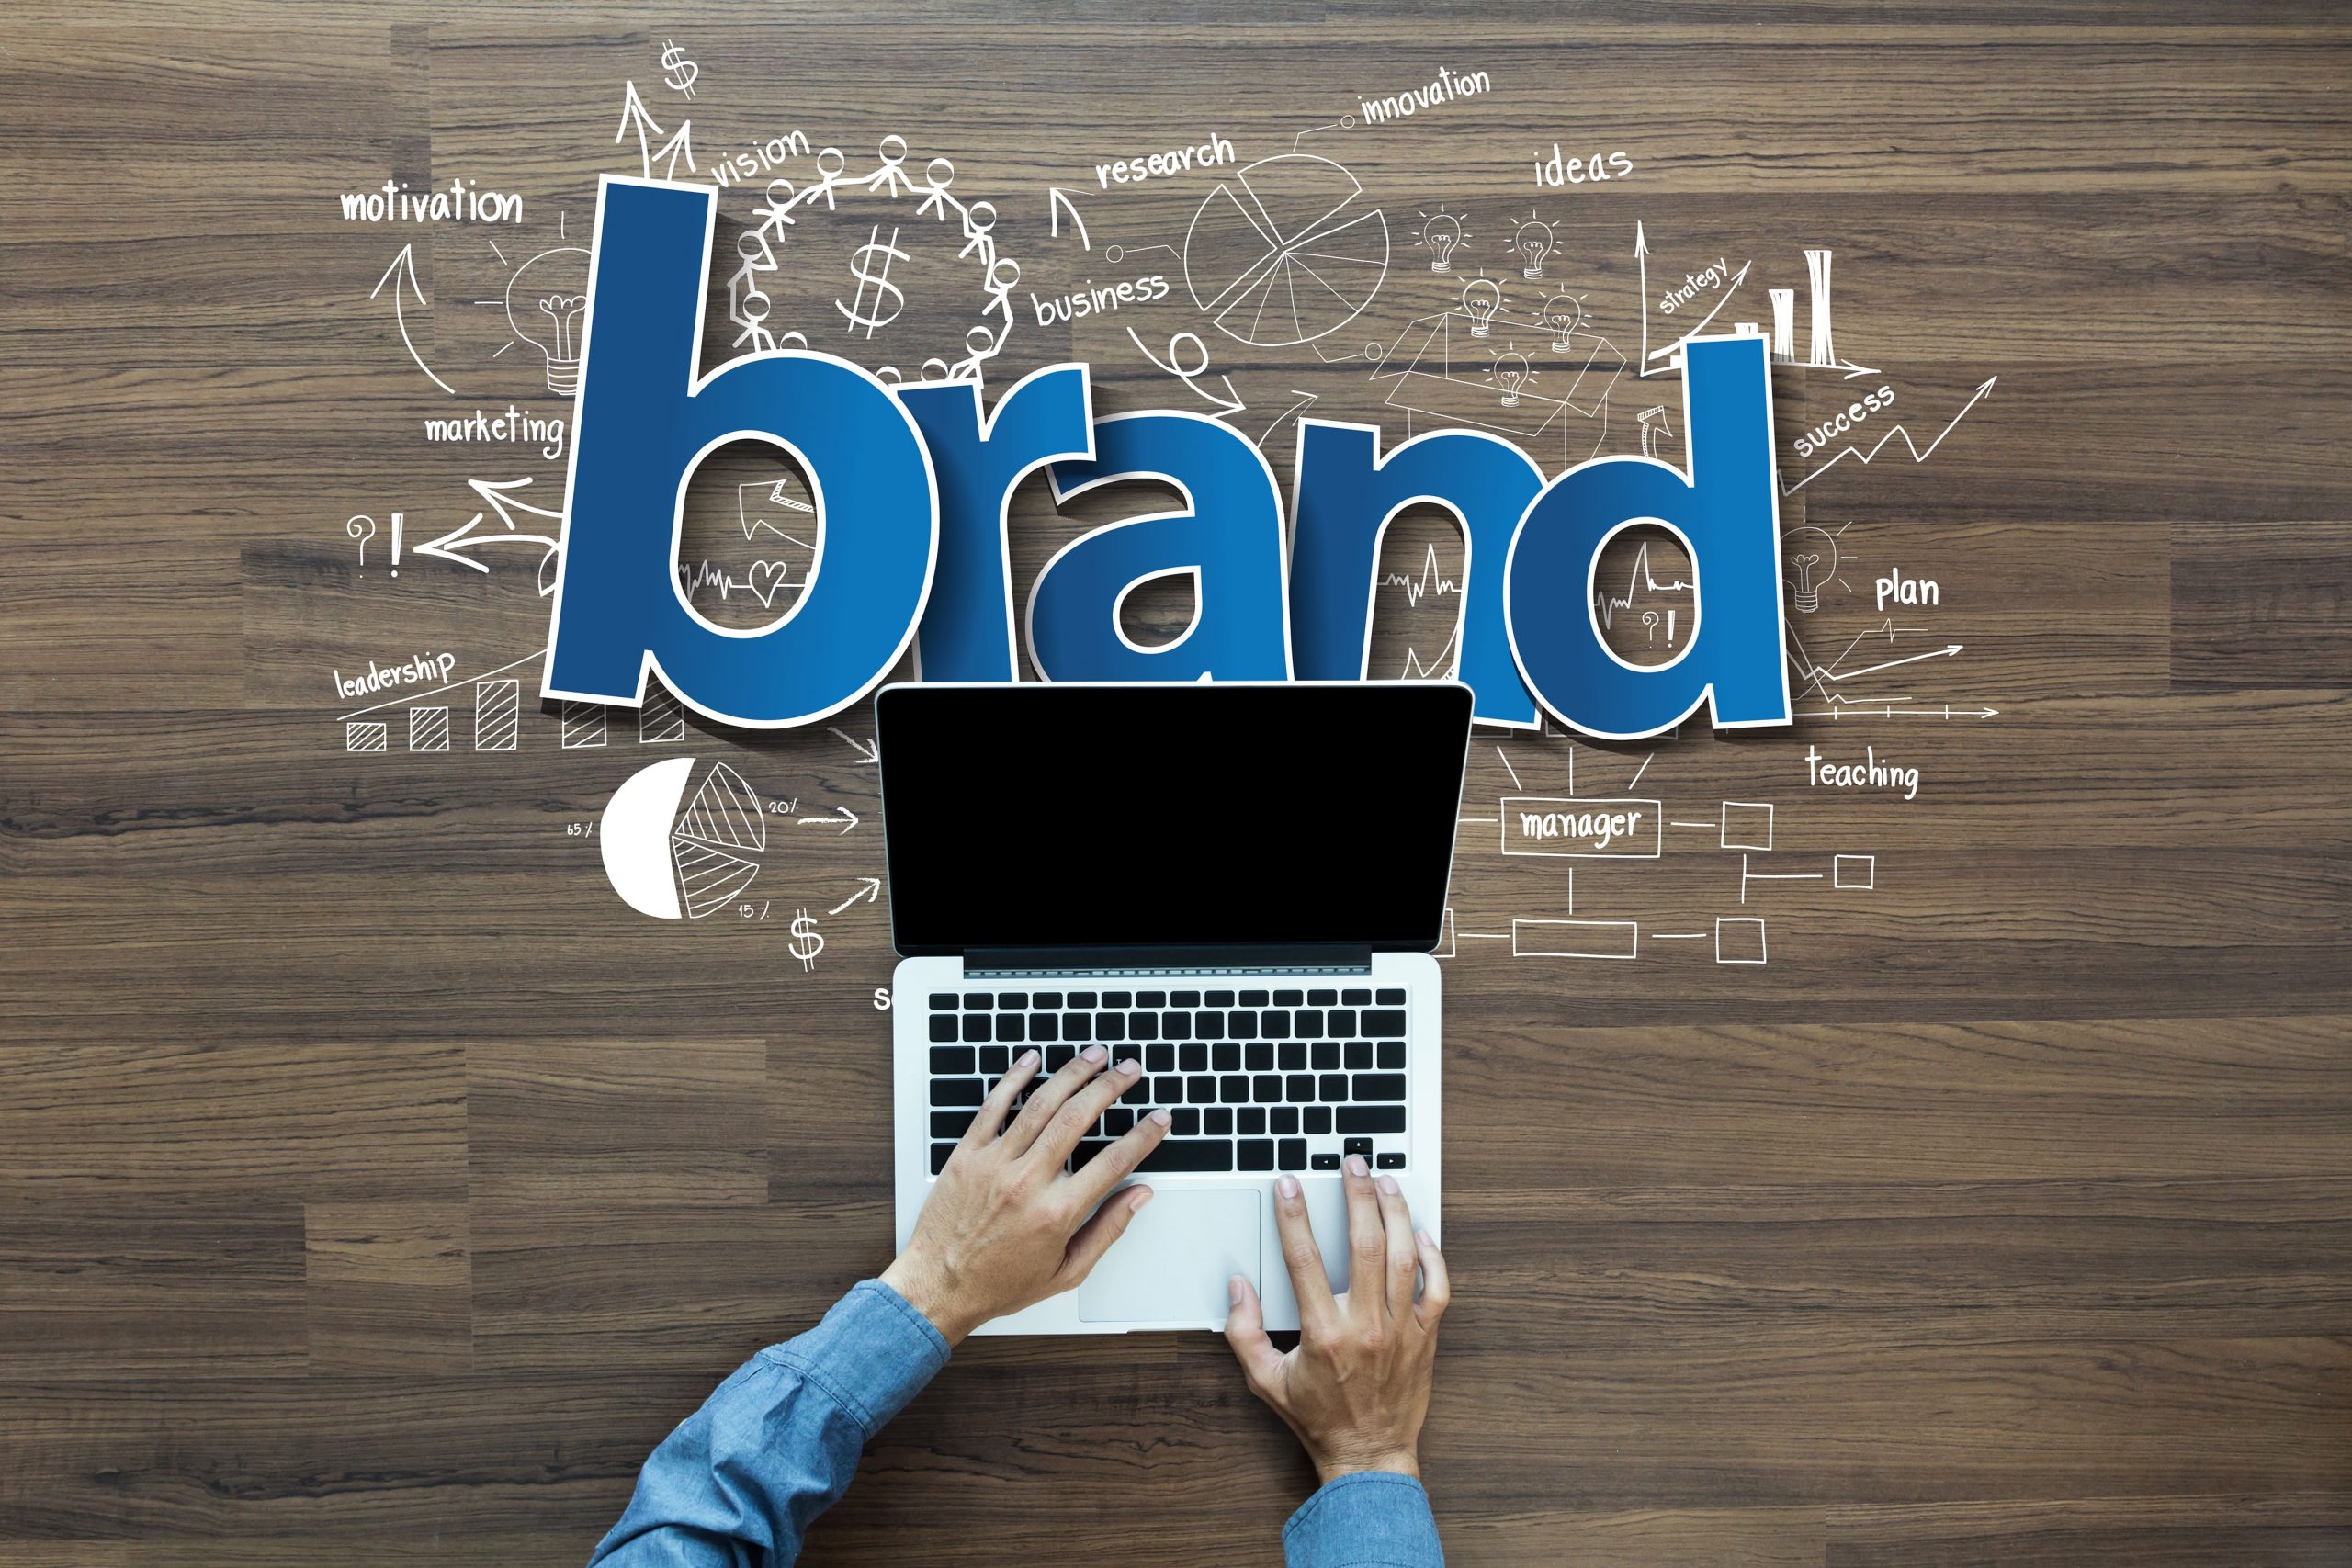 Elements of an Effective Brand Strategy